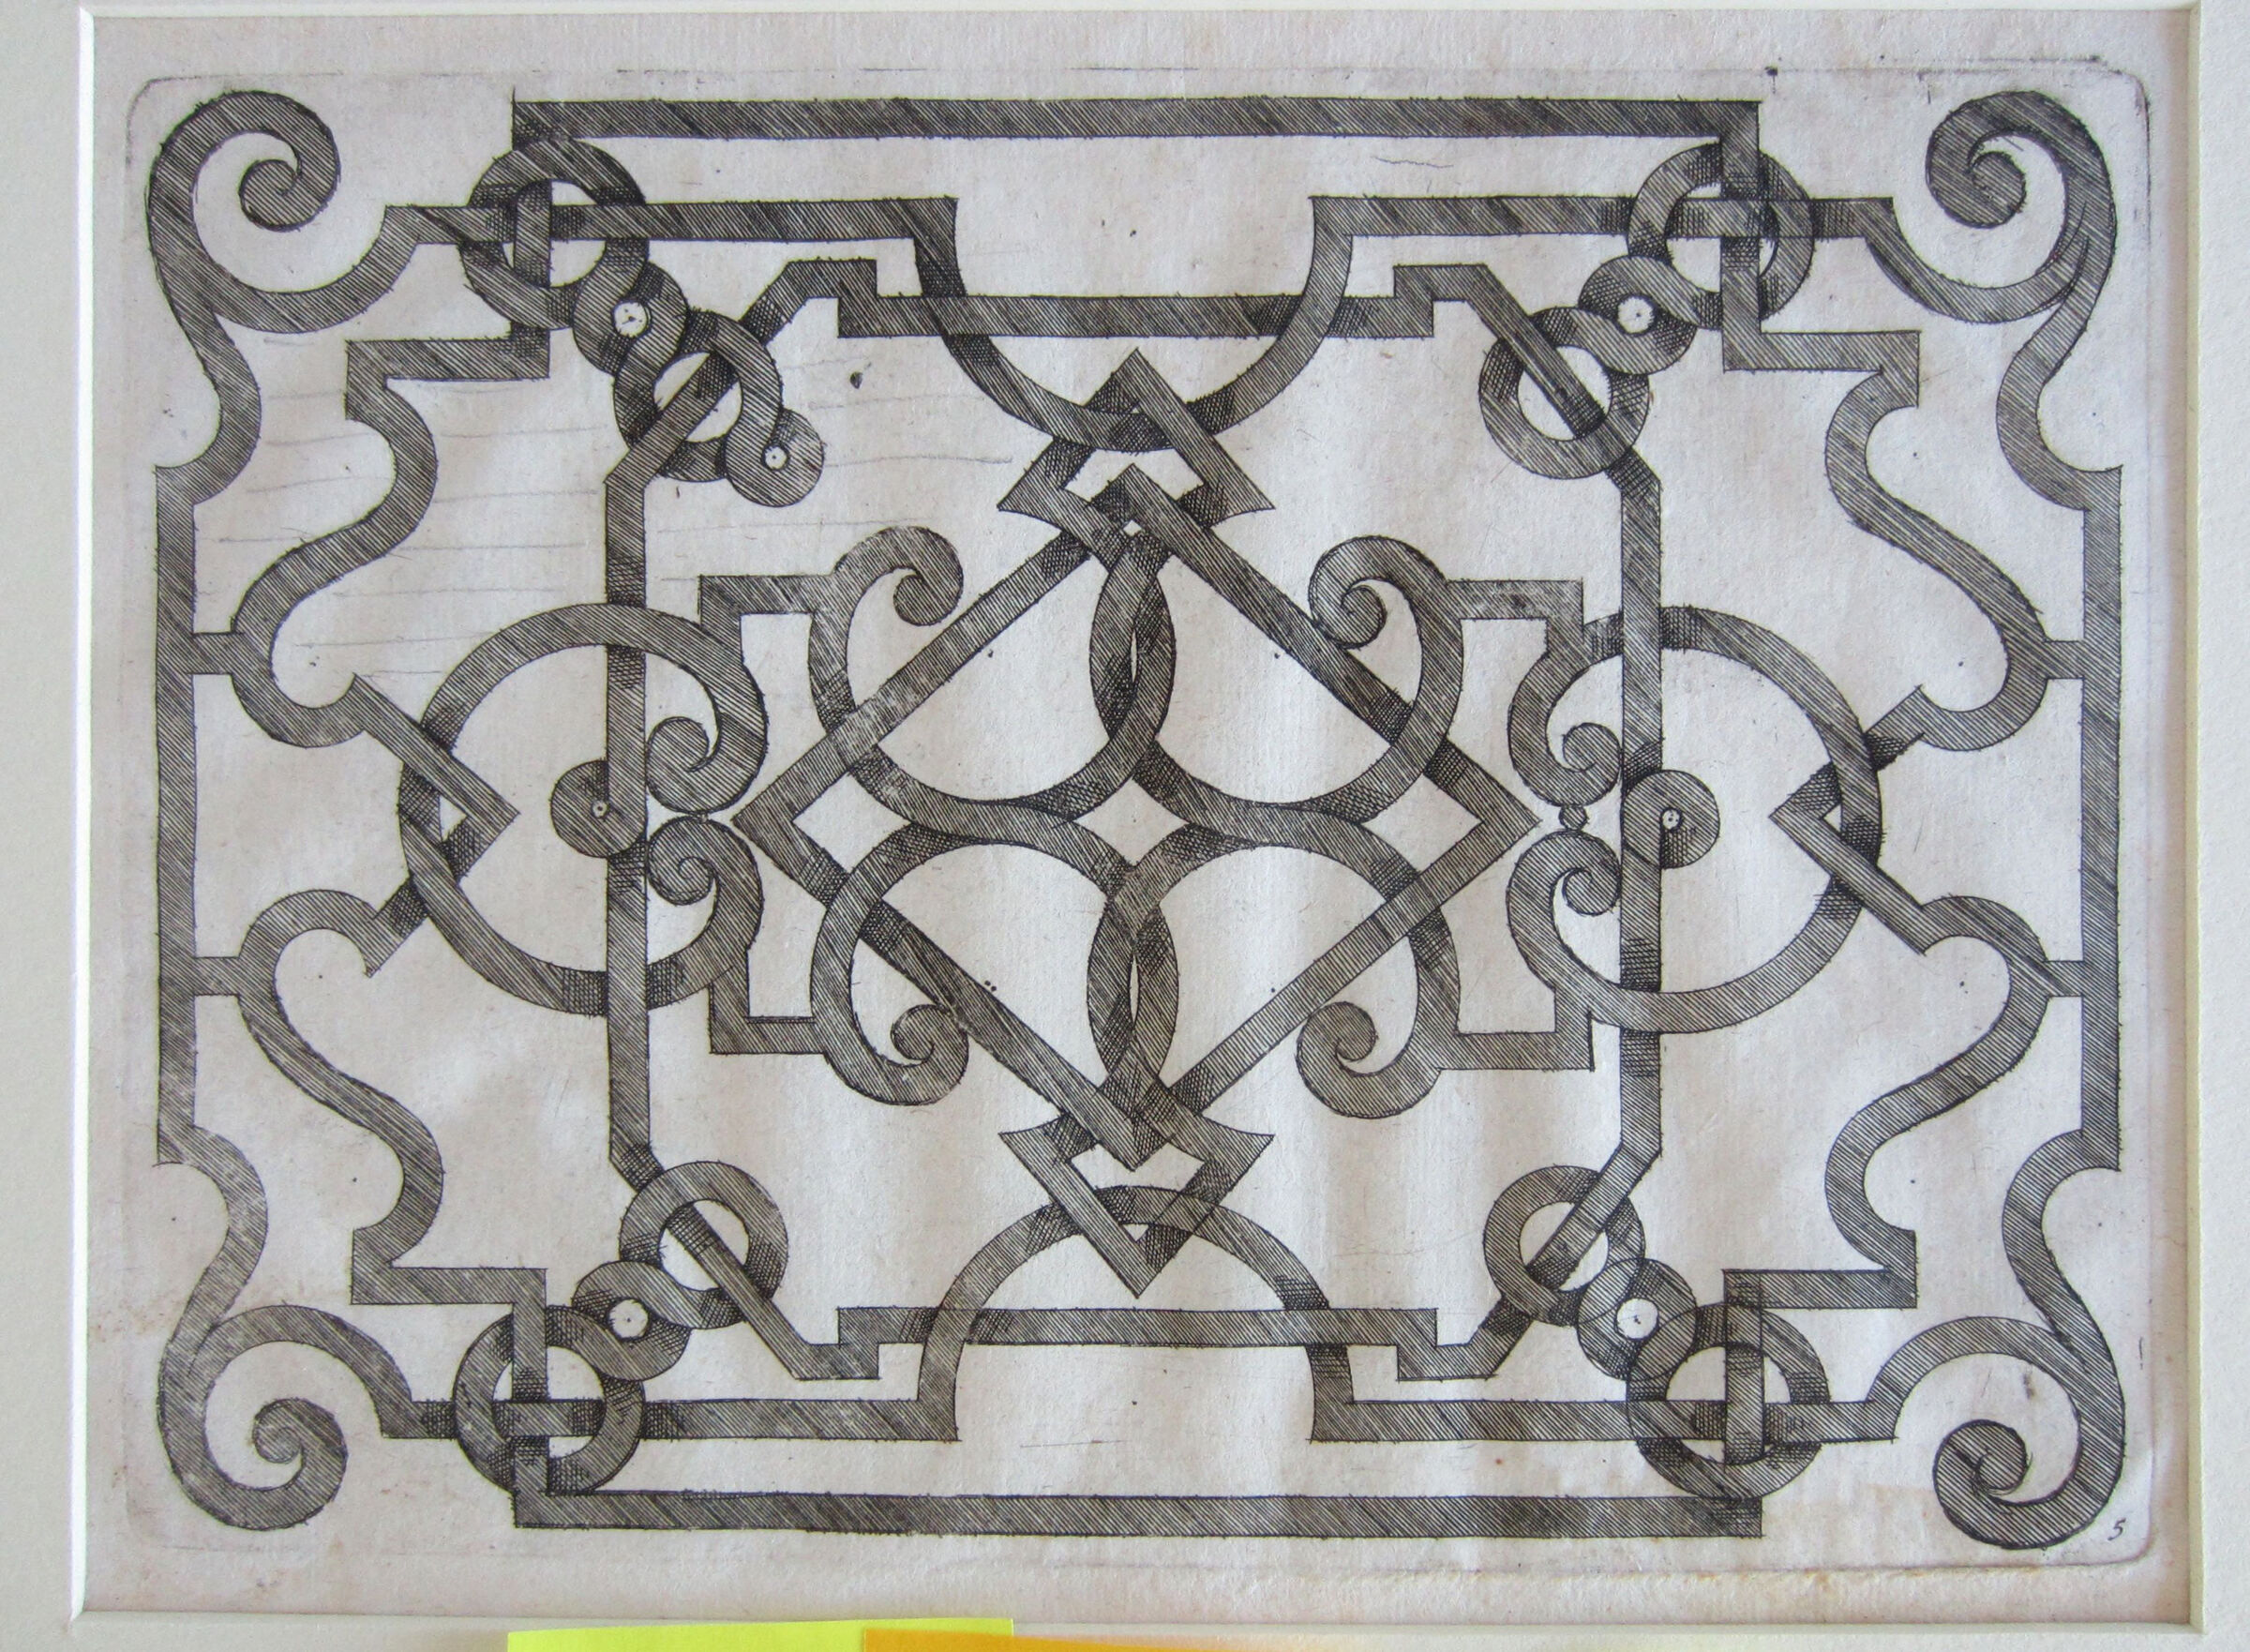 Interlace With Scrolls At Corners, Centered By A Horizontal Lozenge